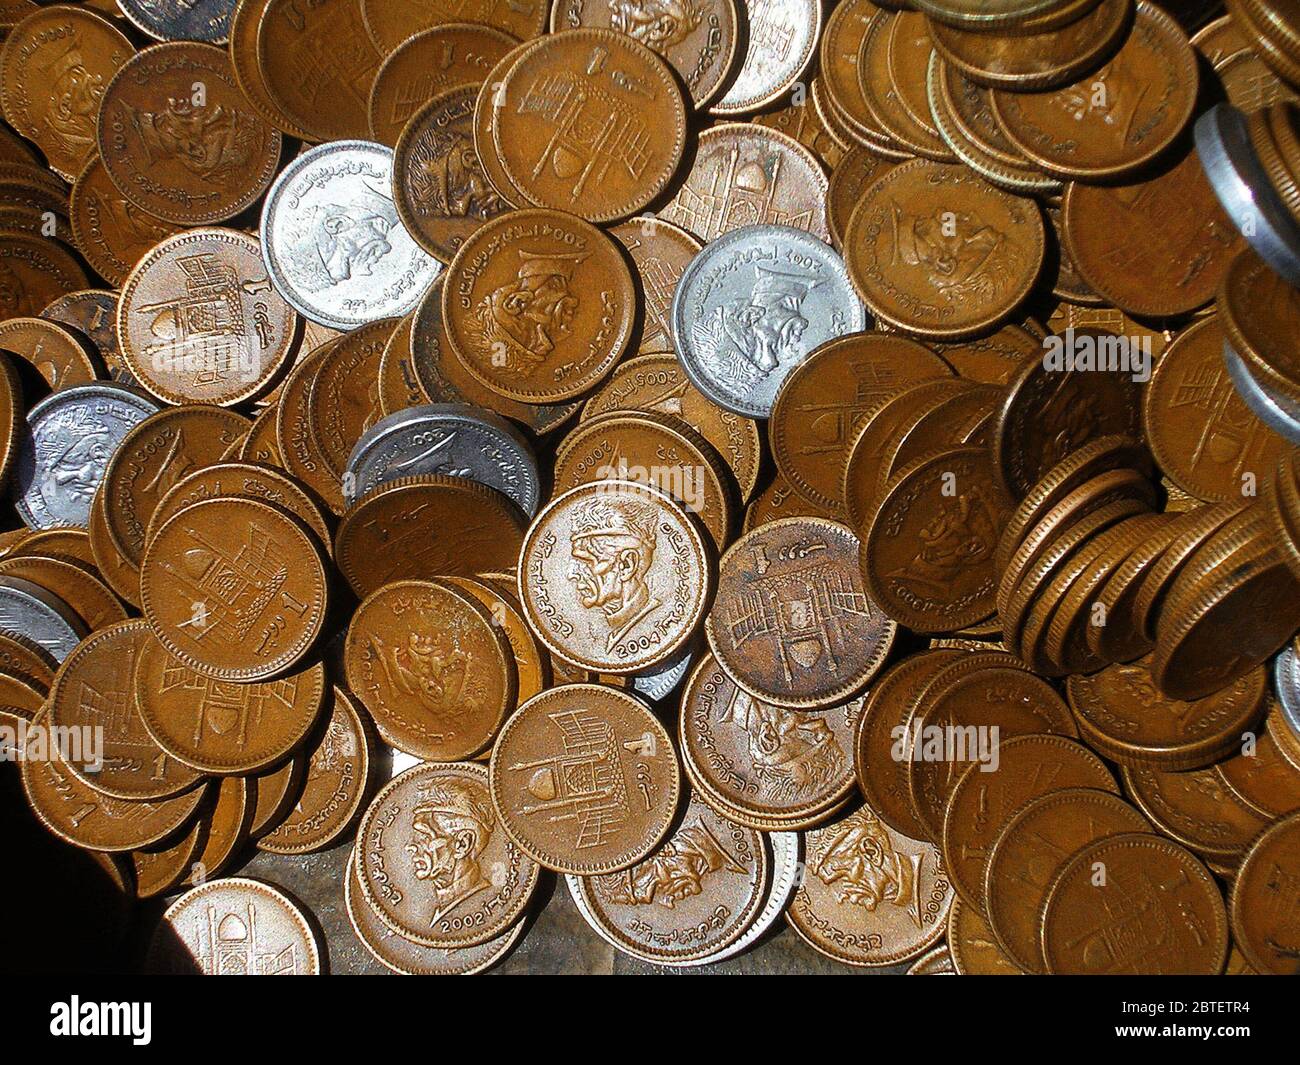 Pakistani Currency - Picture Full Of Metal one rupee Coins including new and old coins Stock Photo